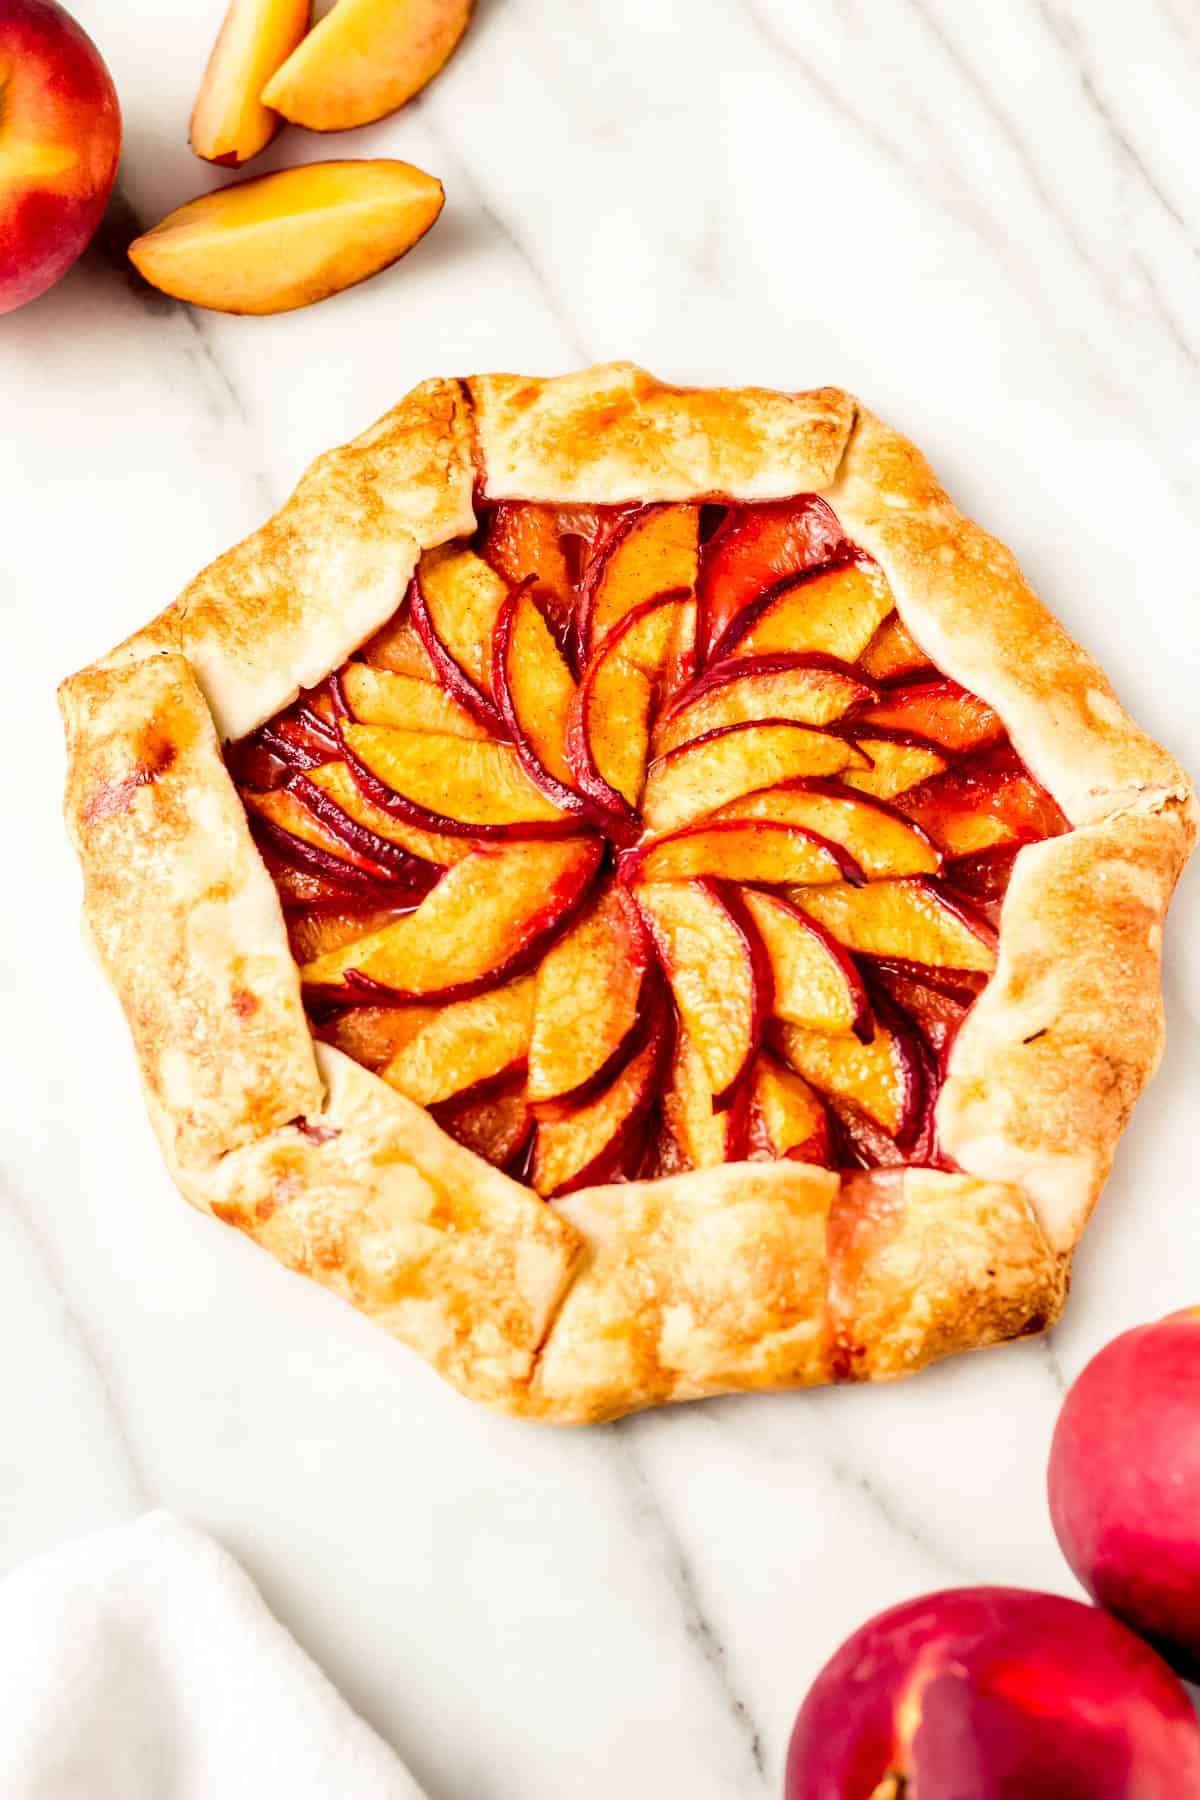 45 degree angle of a peach galette with whole and sliced peaches around it on a marble background